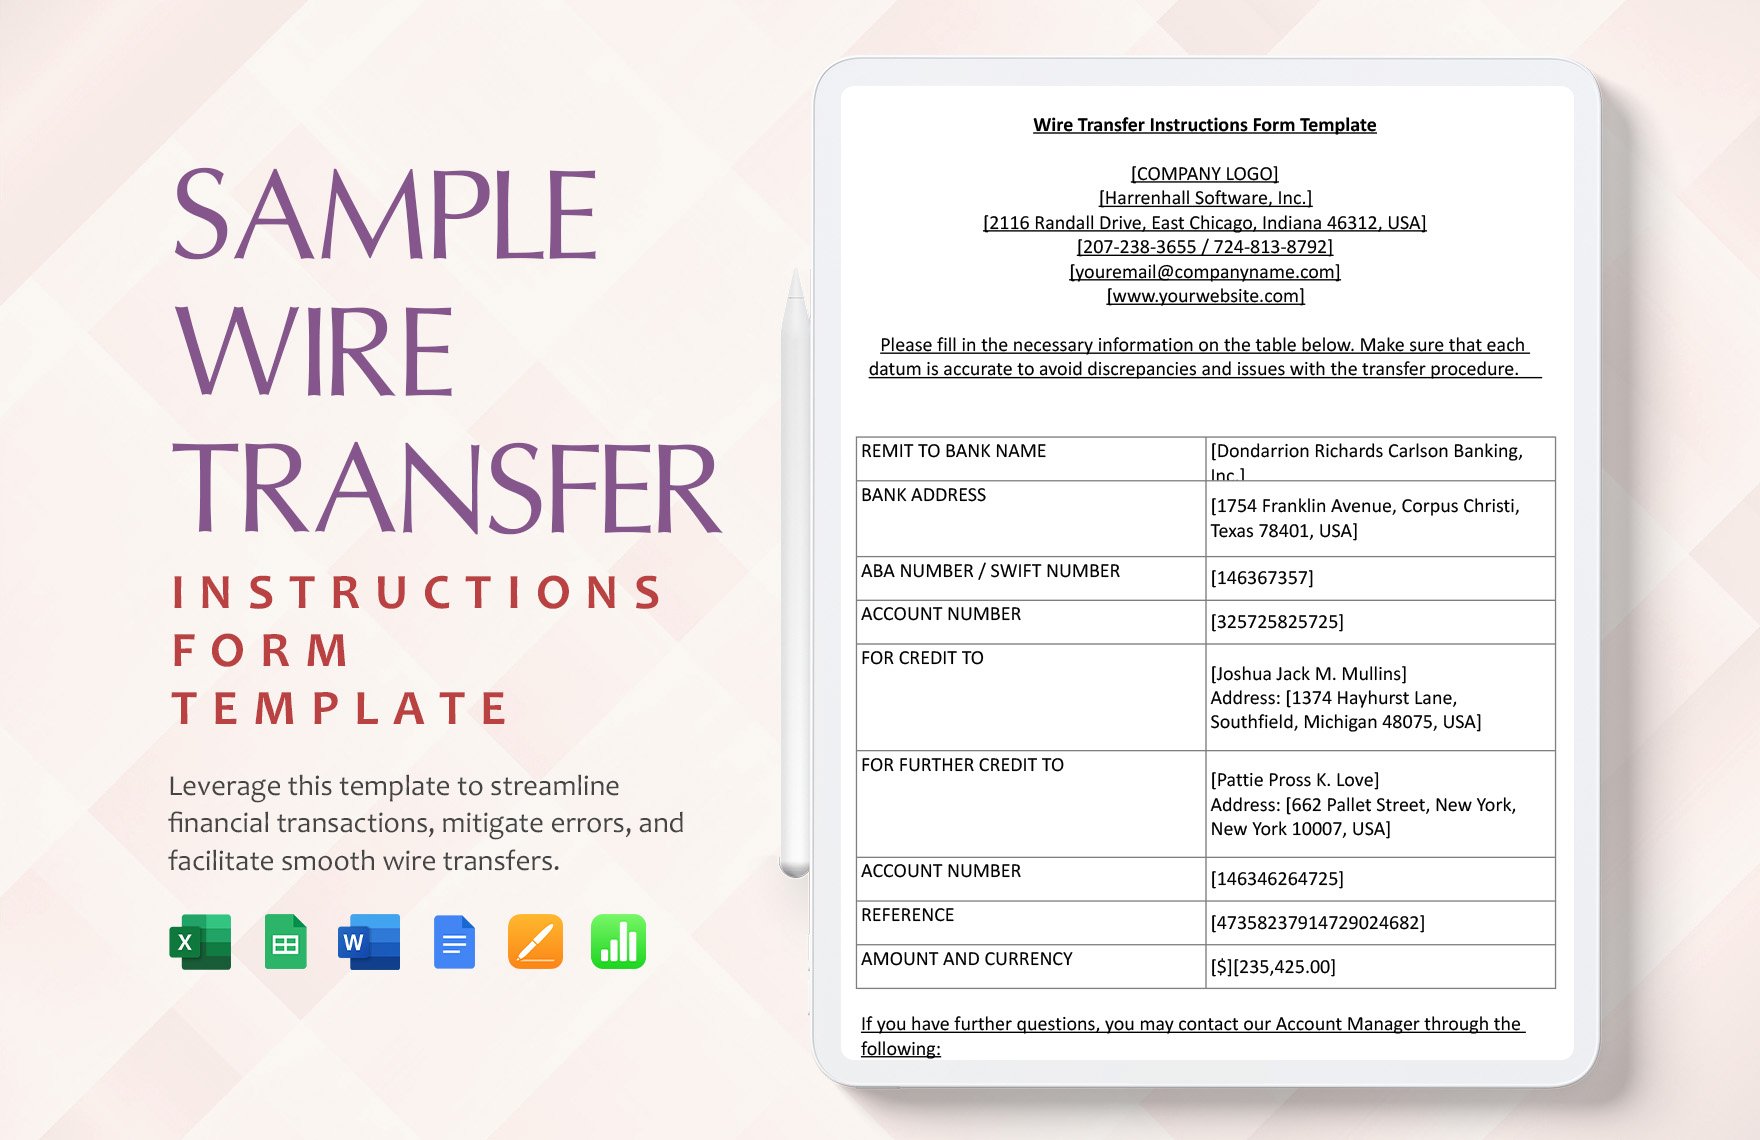 Sample Wire Transfer Instructions Form Template in Word, Google Docs, Excel, Google Sheets, Apple Pages, Apple Numbers